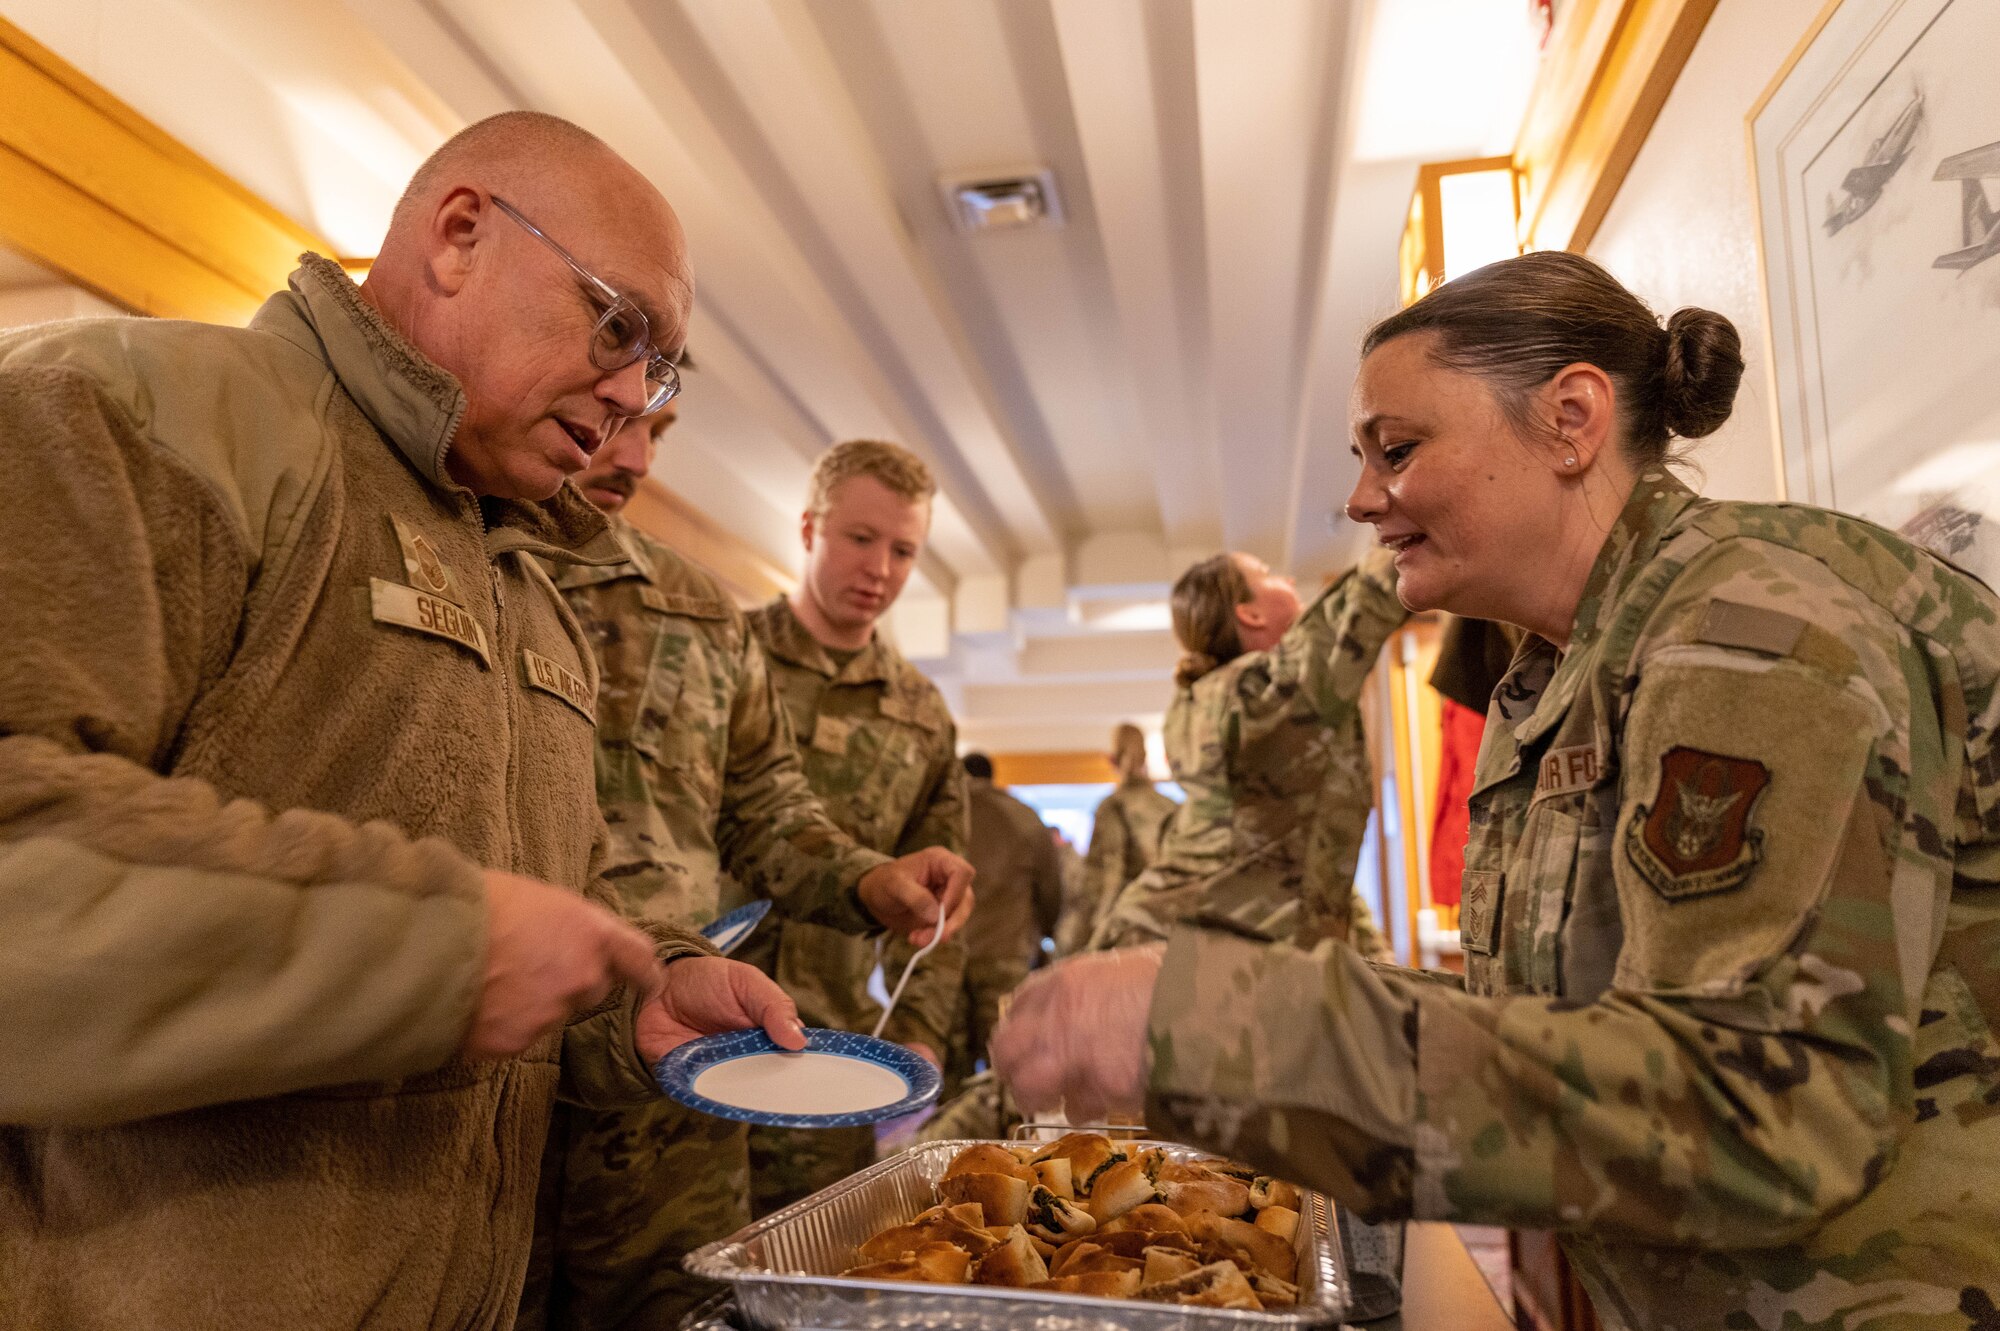 Senior Master Sgt. Chris Seguin, 934th Maintenance Squadron accessories flight chief, receives a Lebanese flatbread from Chief Master Sgt. Kristen Maloney, 934th Mission Support Group senior enlisted leader, during the 934th Airlift Wing’s Celebration of Nations at Minneapolis-Saint Paul Air Reserve Station, Minnesota, Nov. 5, 2022. This event provided Airmen an opportunity to try culturally different foods, listen to different music and look at different types of clothes.  (U.S. Air Force photo by Airman First Class Colten Tessness)